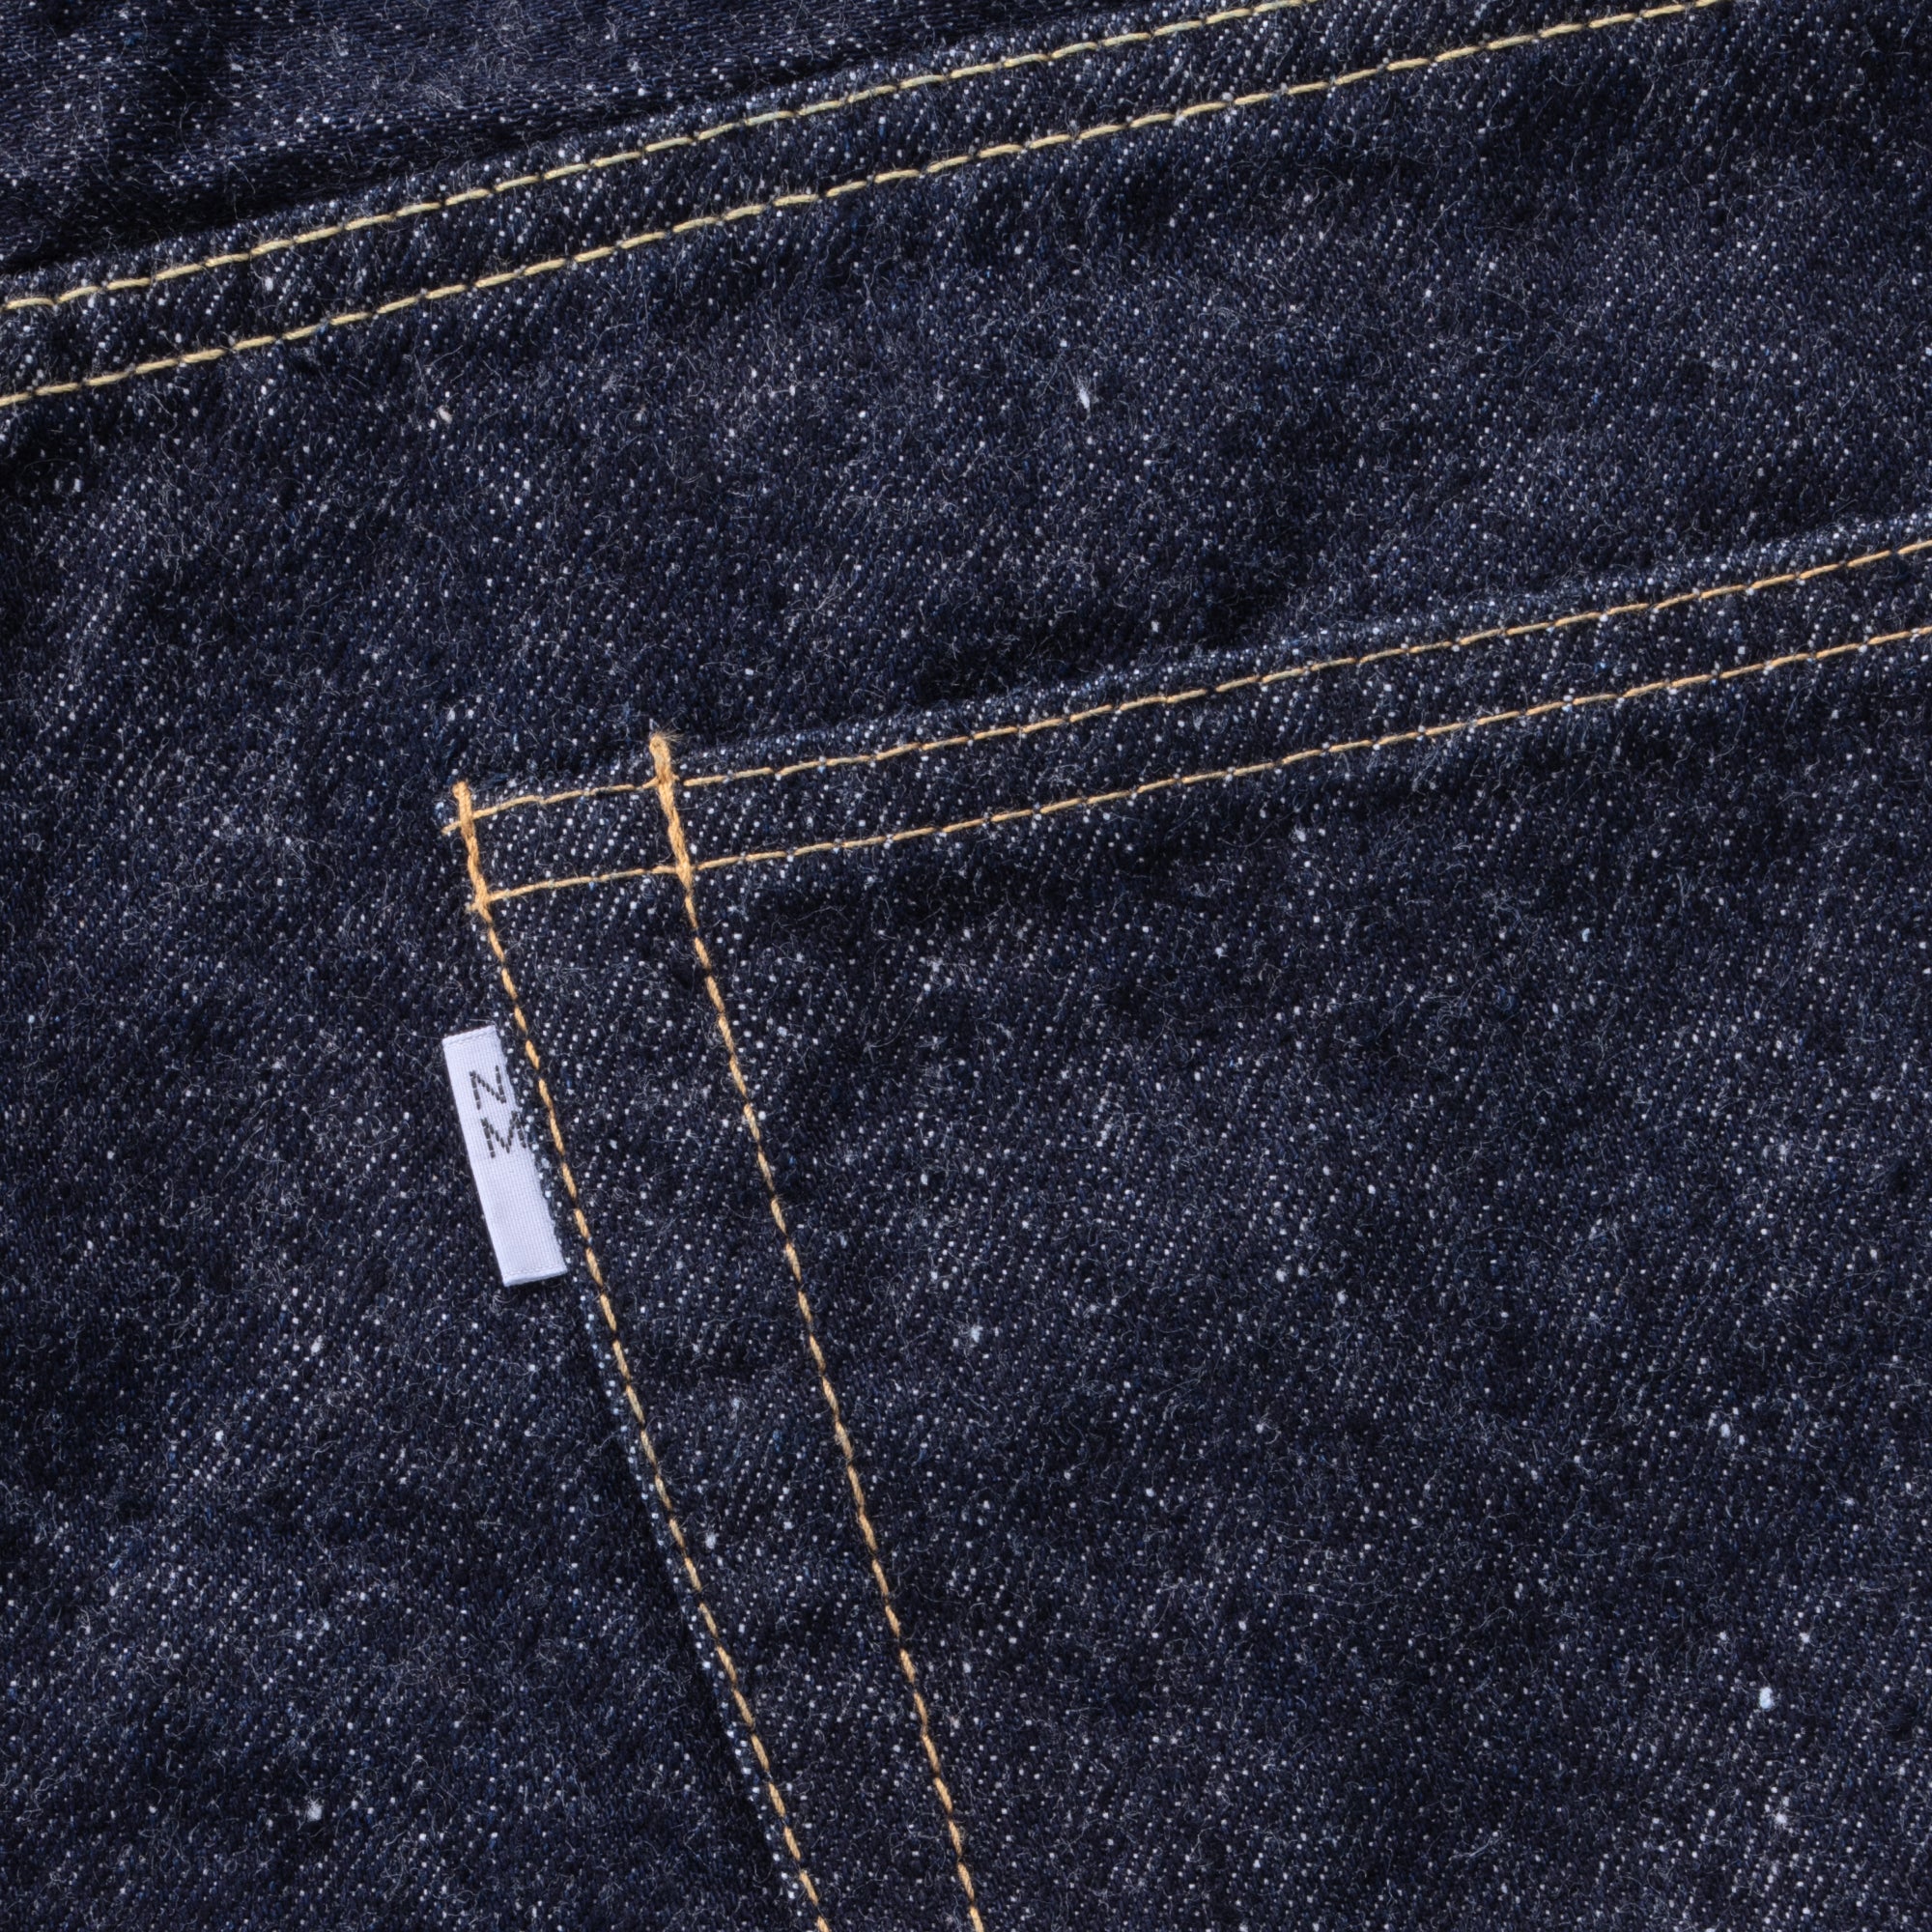 New Manuel #017 LV61'sTAPERED ONE-WASHED